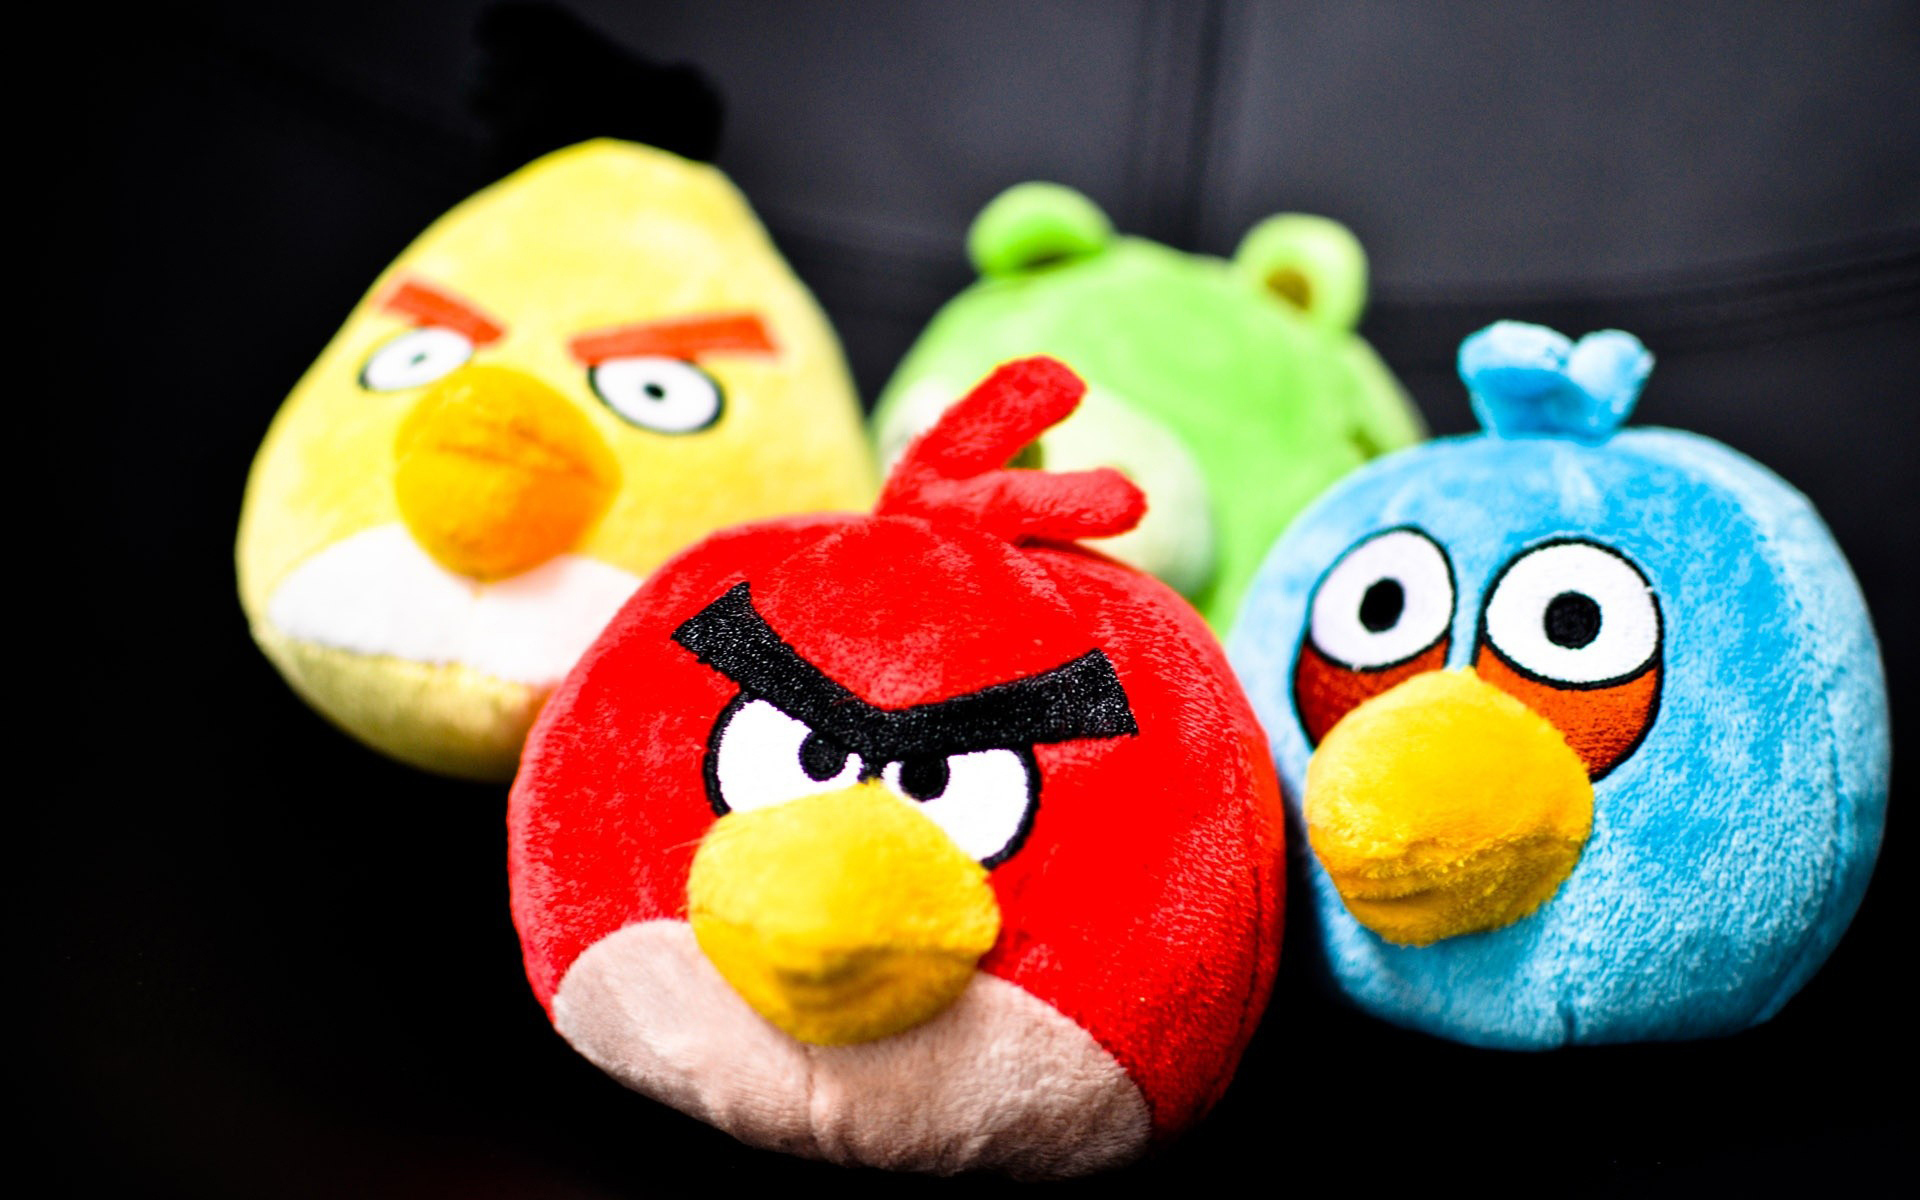 Wallpapers soft toys angry birds evil birds on the desktop